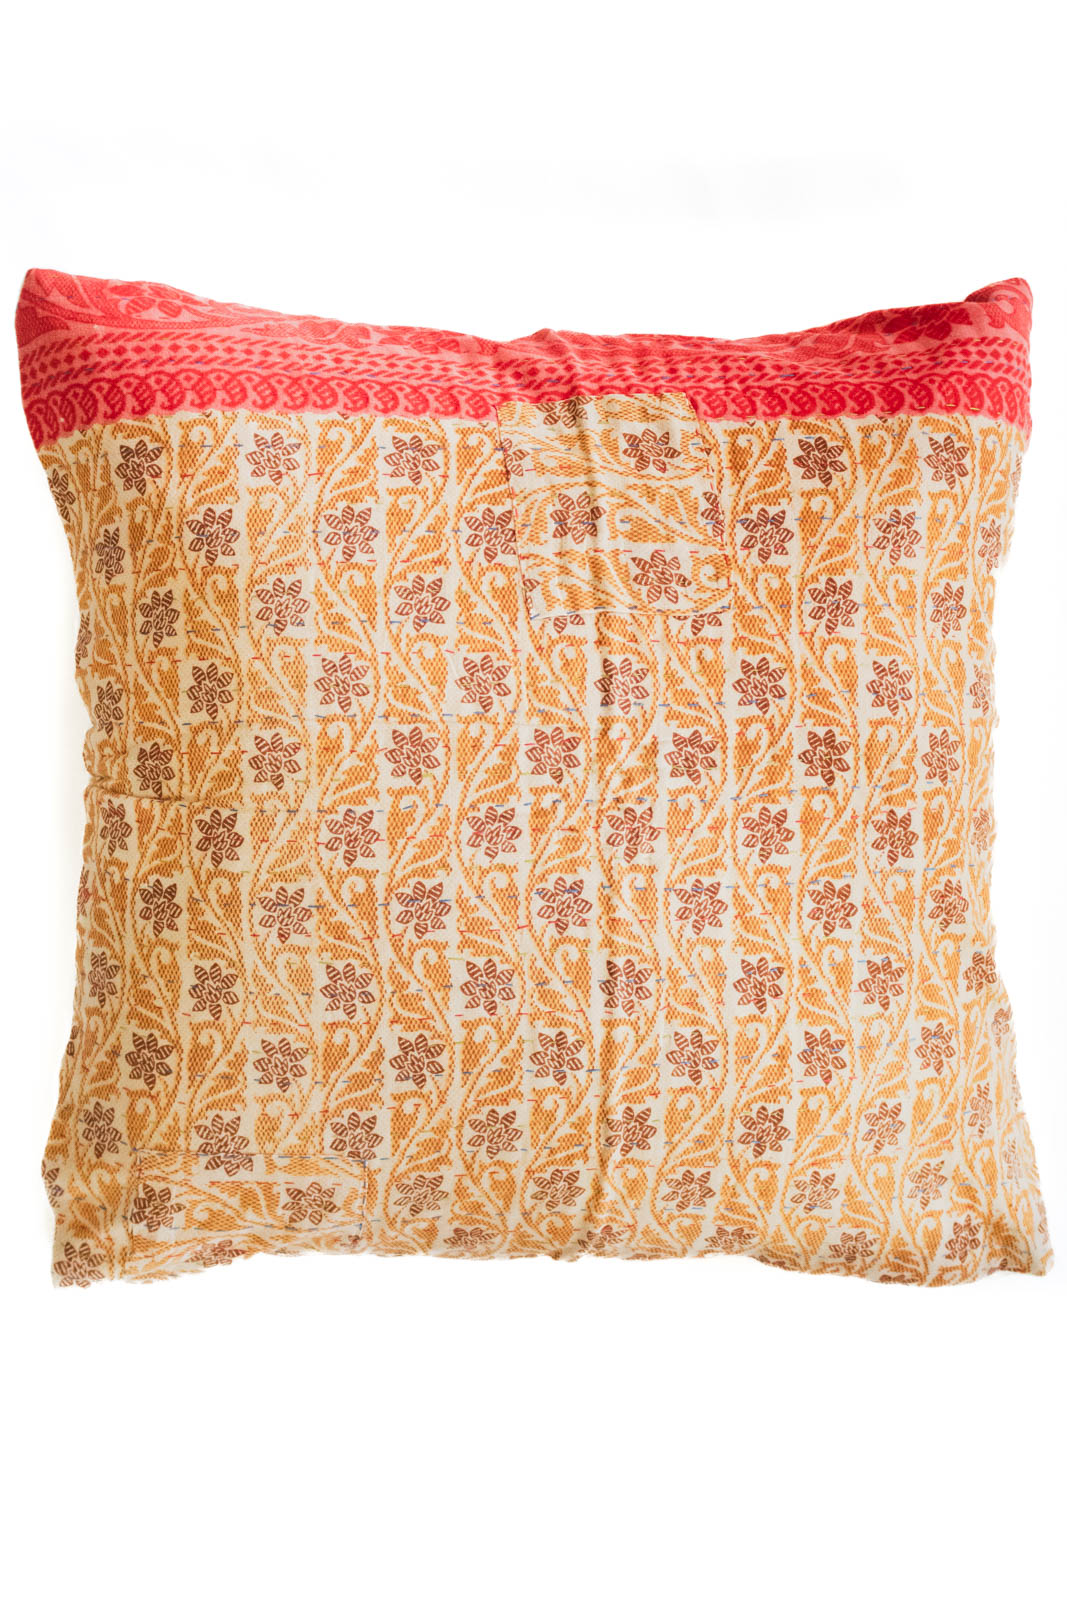 Charm no. 5 Kantha Pillow Cover